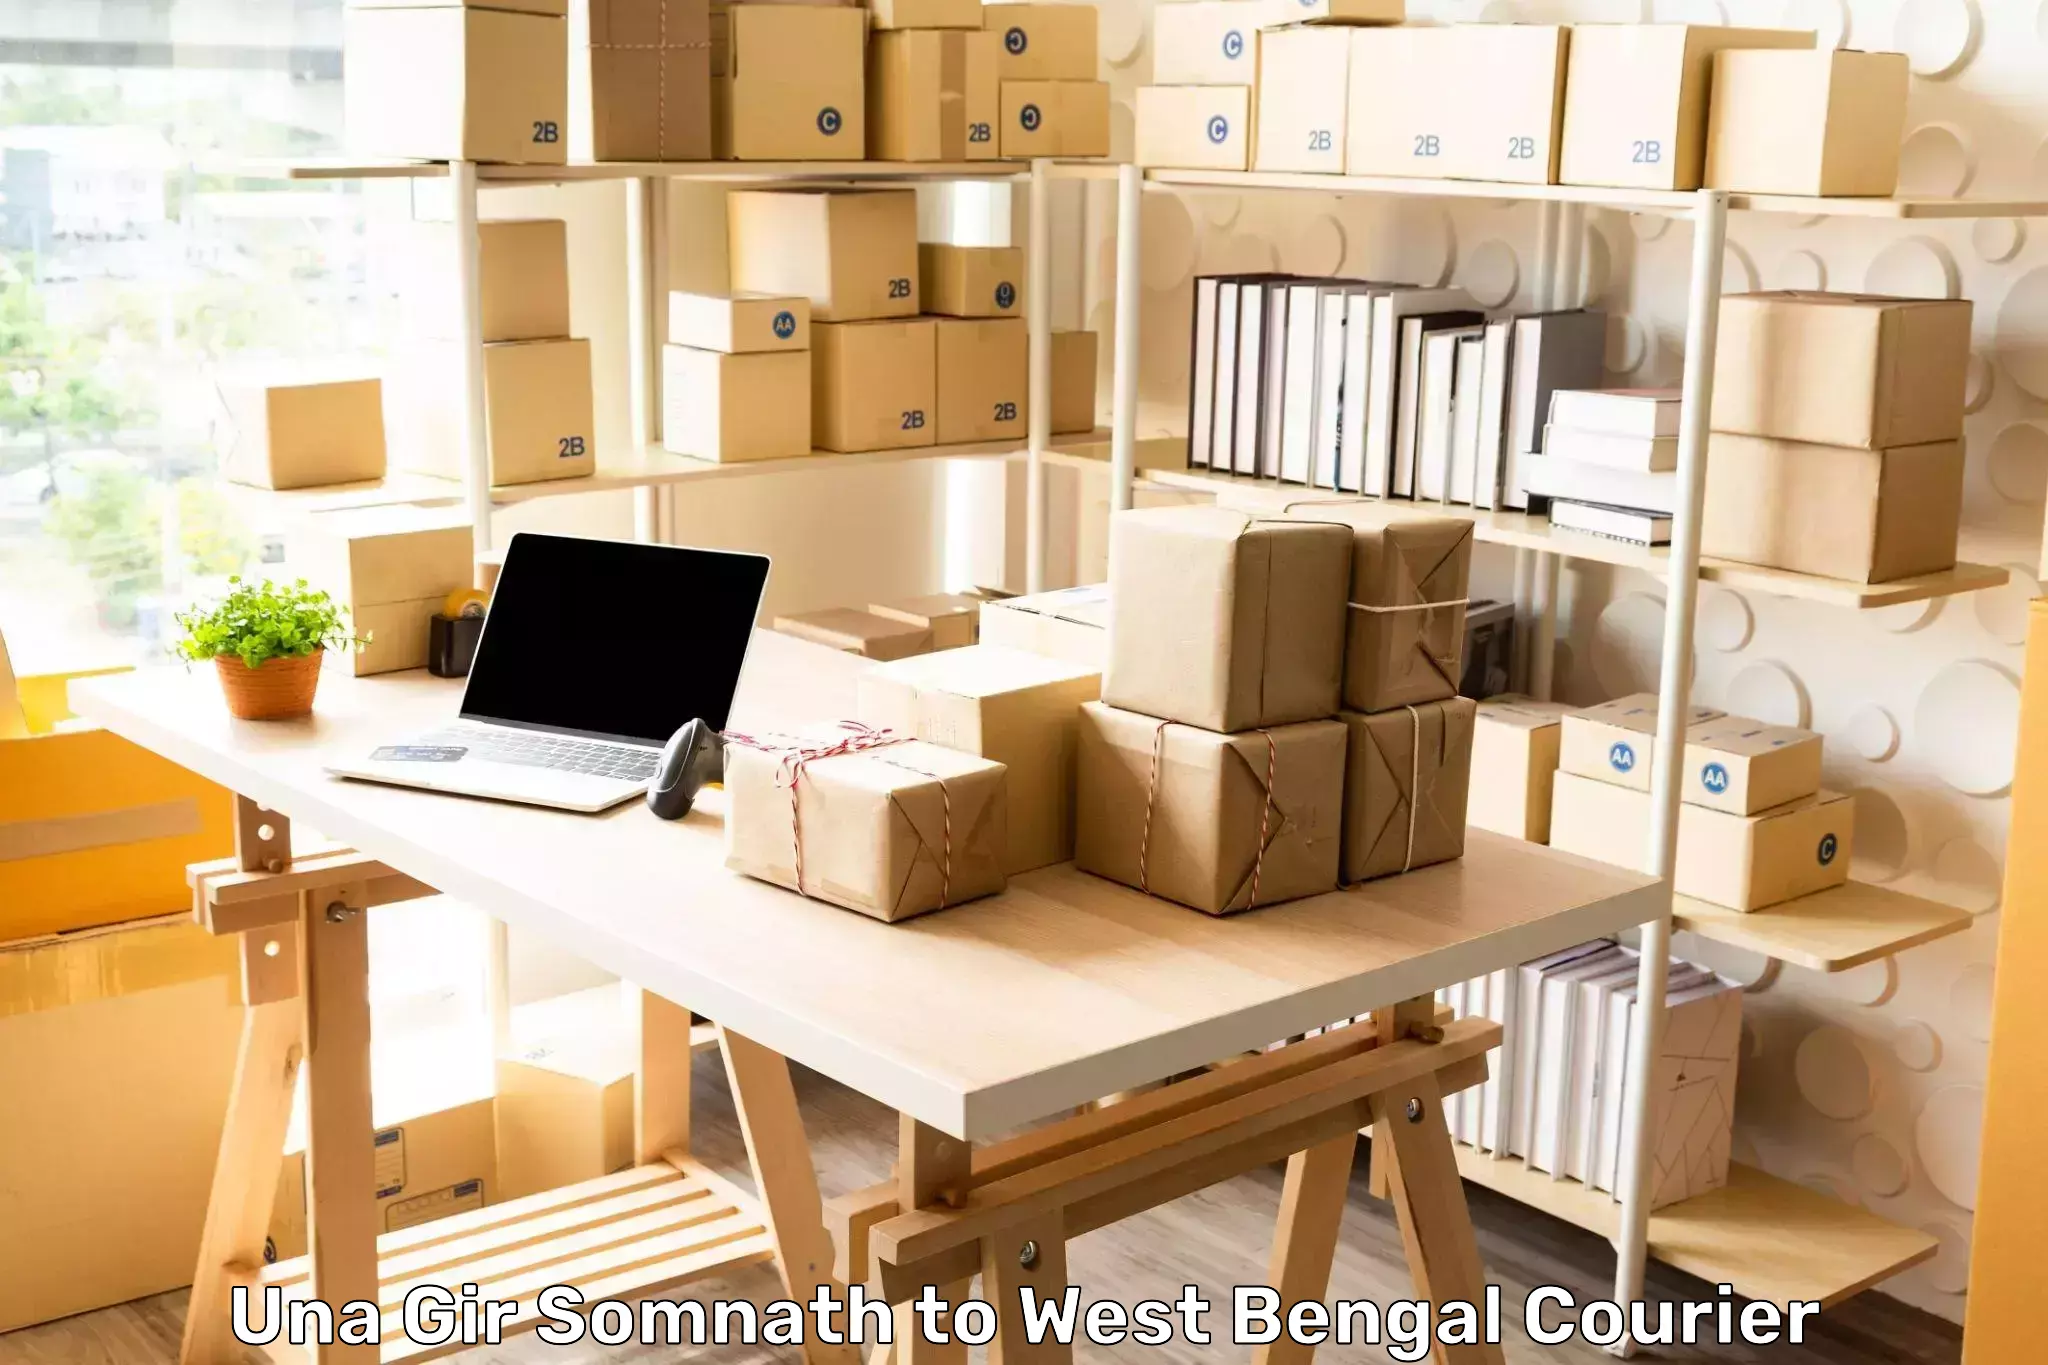 Subscription-based courier Una Gir Somnath to Balagarh